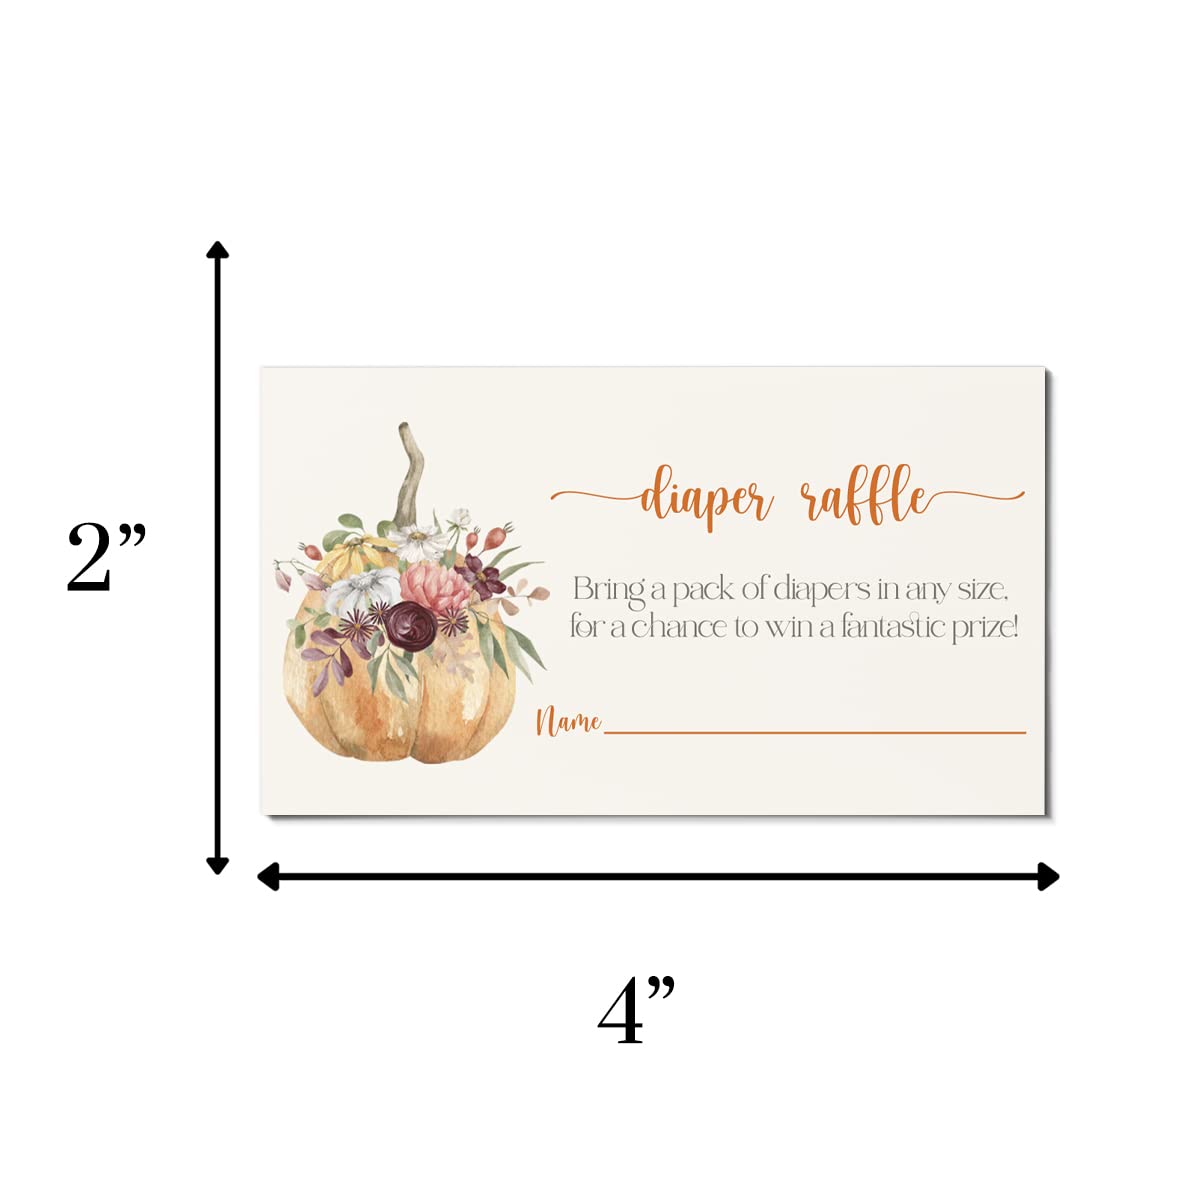 Pumpkin Diaper Raffle Tickets (25 Pack) Baby Shower Games Halloween – Floral Invitation Insert Cards - Guests Fill-In to Win Prize Drawings - Size 2x4